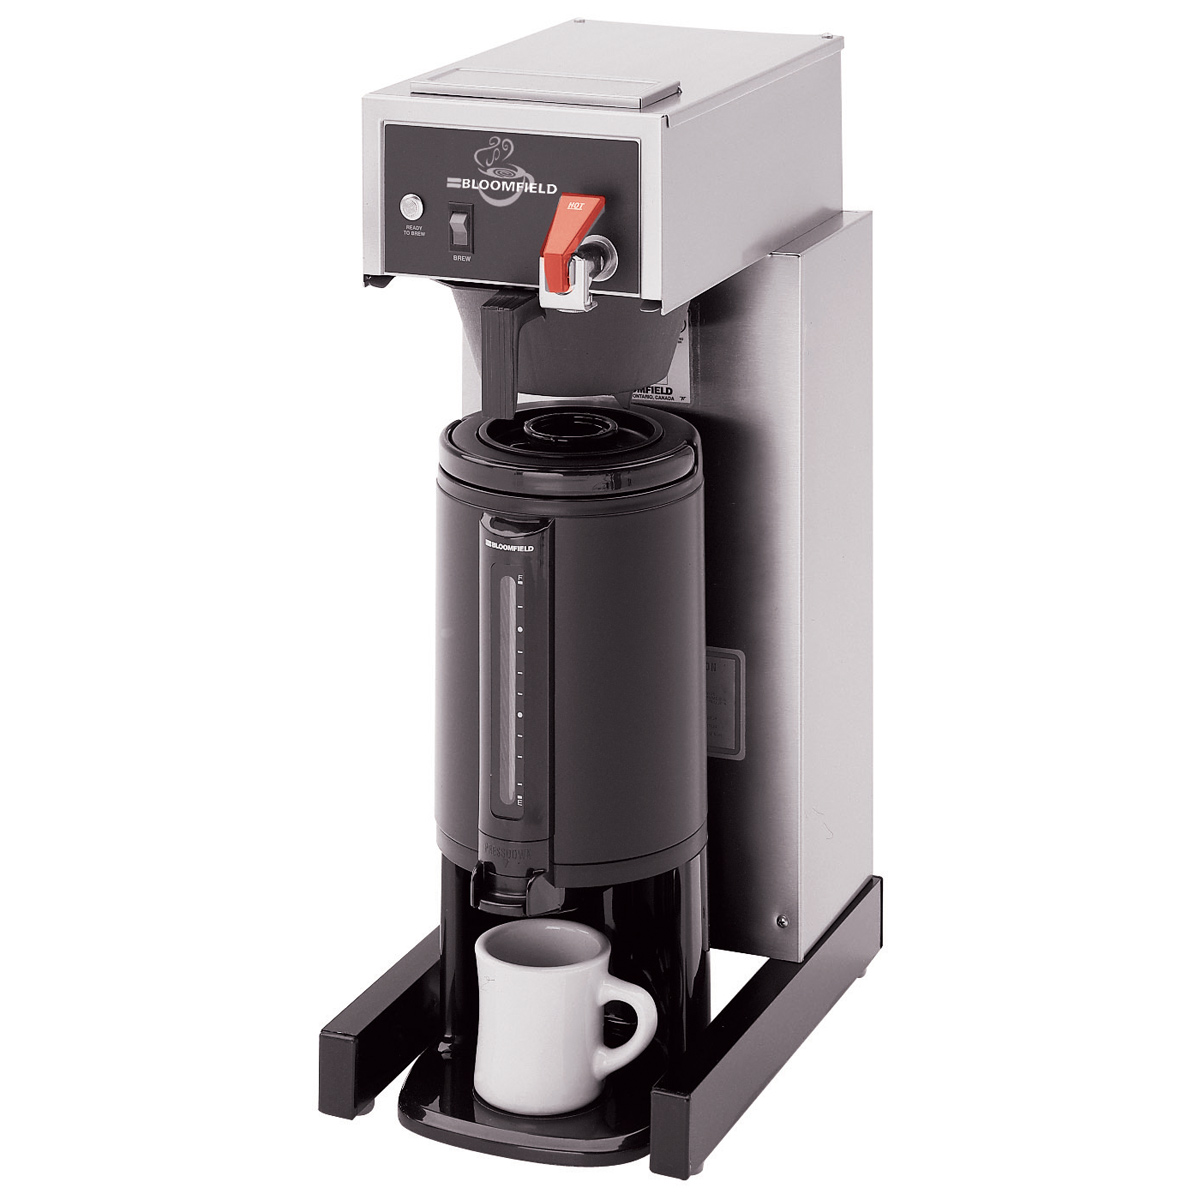 BL8780 Thermal Carafe/Glass Pot Coffee Brewers for Businesses in New Jersey and New York